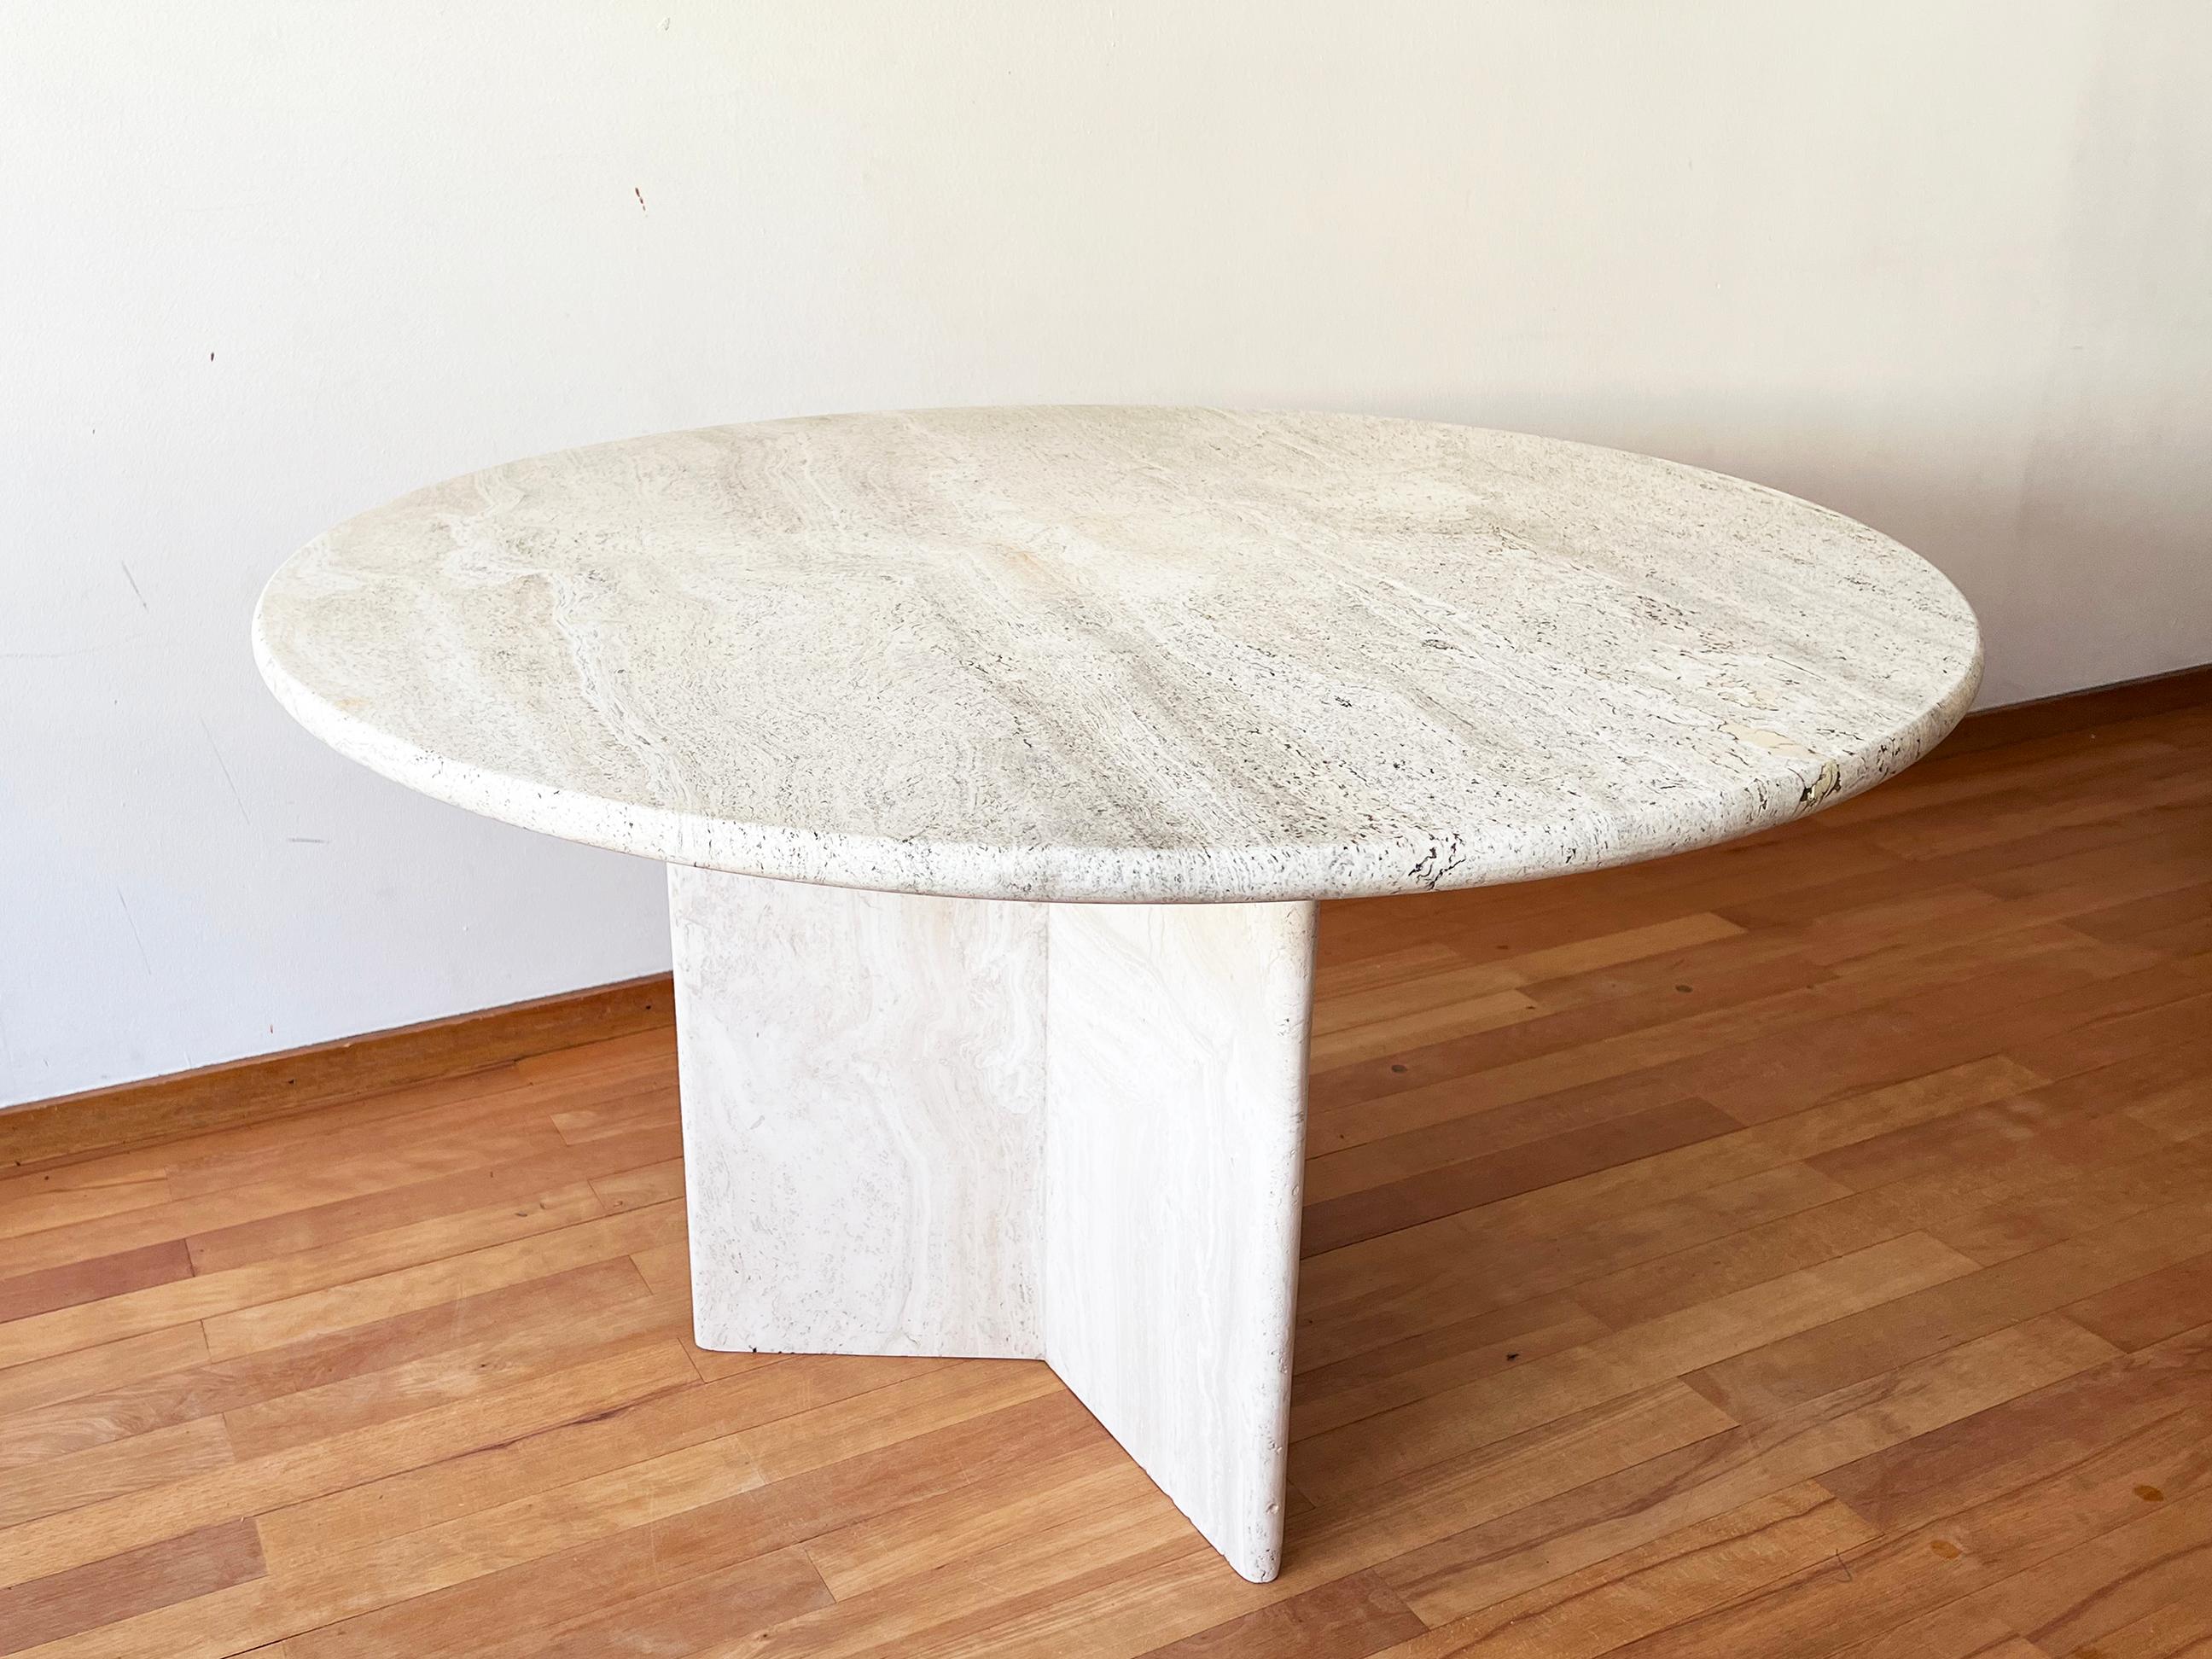 Postmodern 1970s Cream Off White Round Travertine Dining Table, Pedestal Base In Good Condition For Sale In Basel, BS